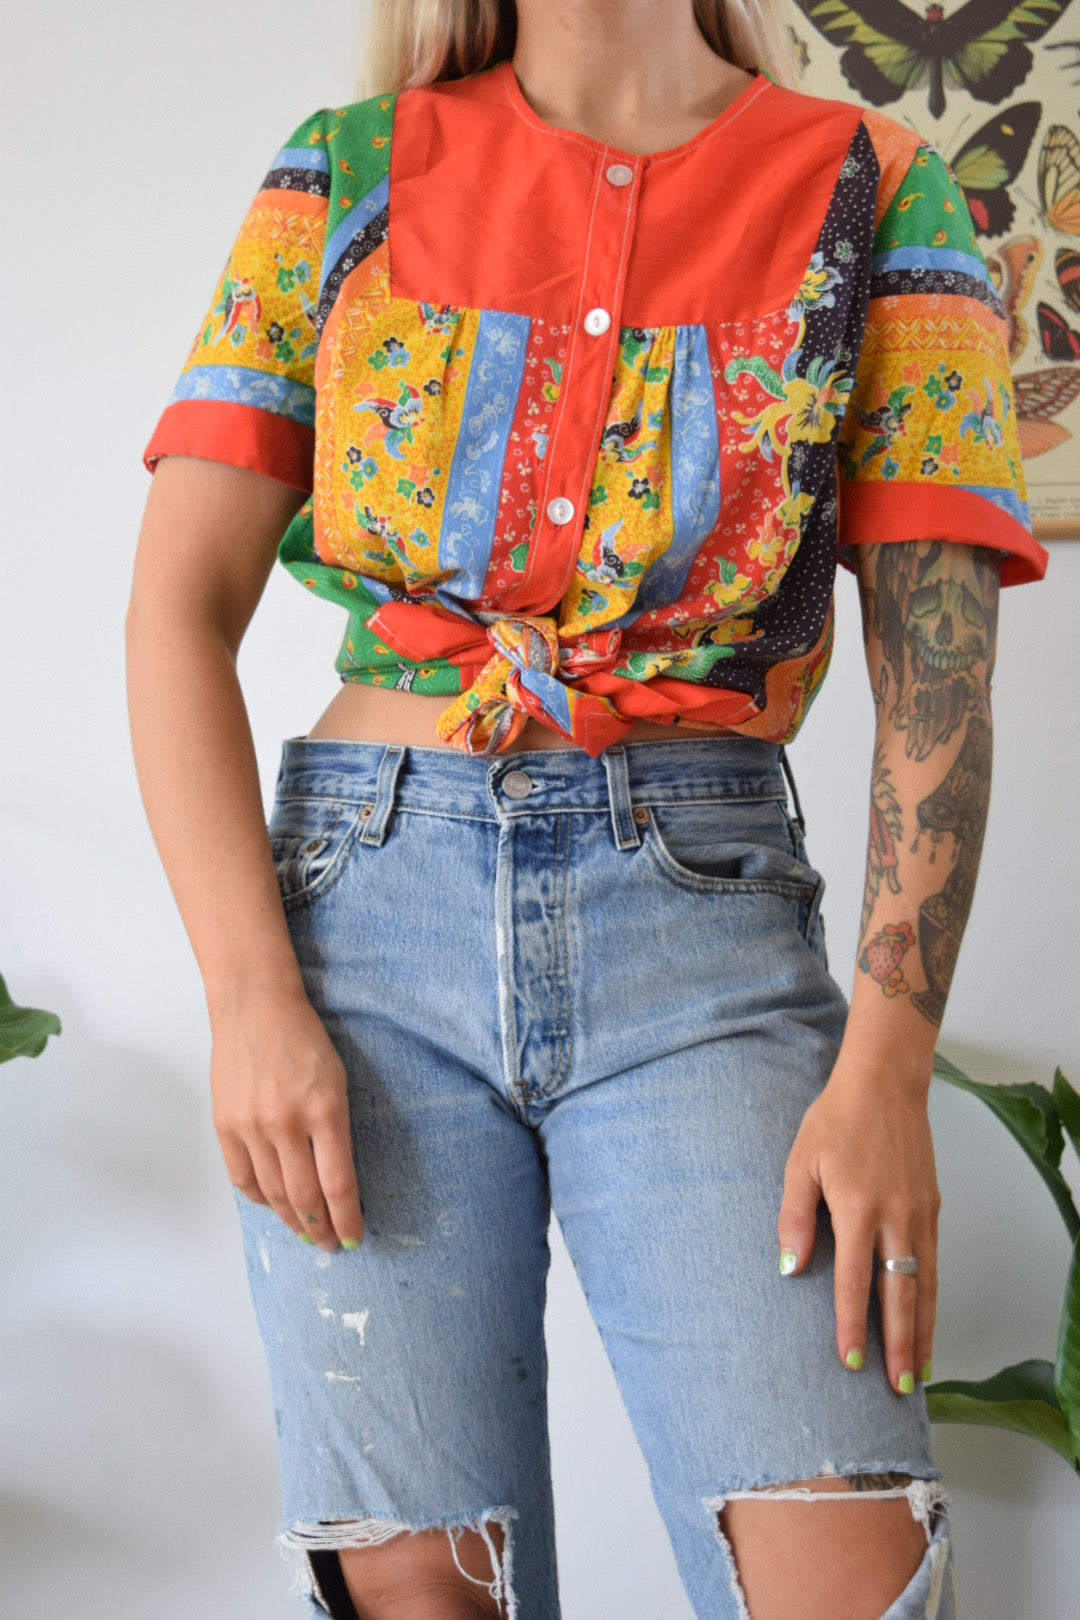 60s Primary Color House Shirt - S/M